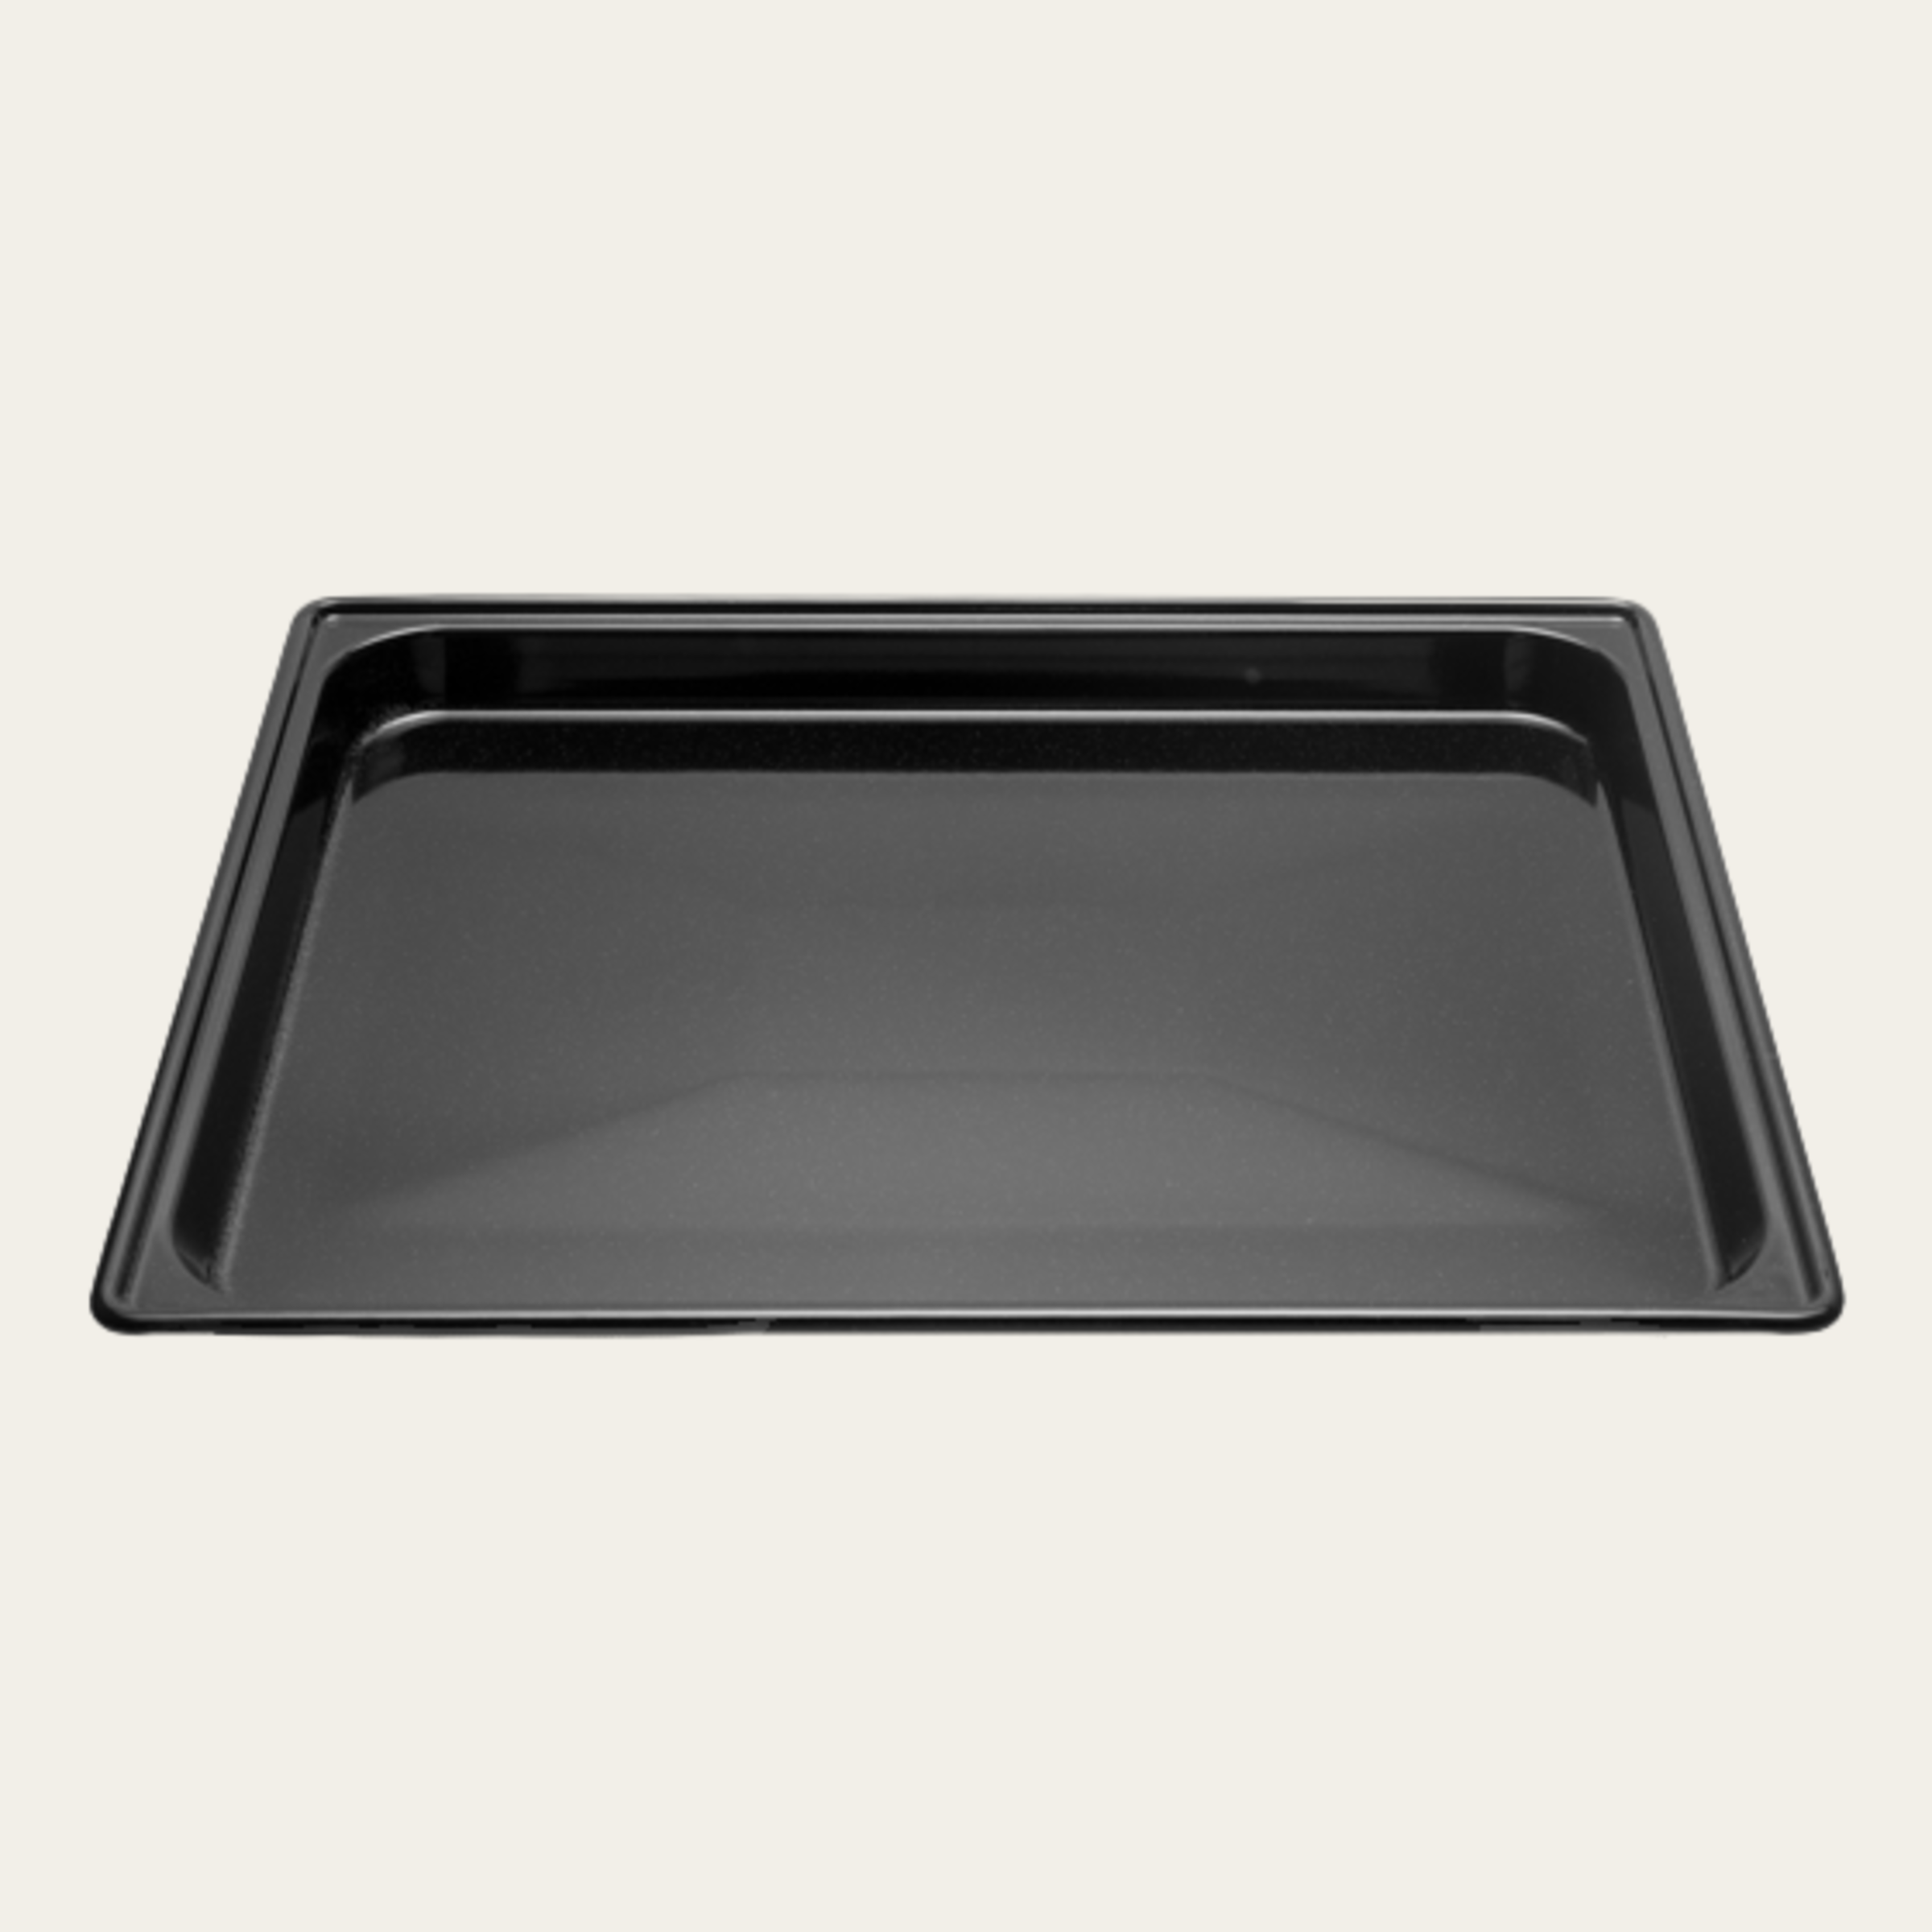 Baking tray for cooking chambers, 48 liter (370 x 430)